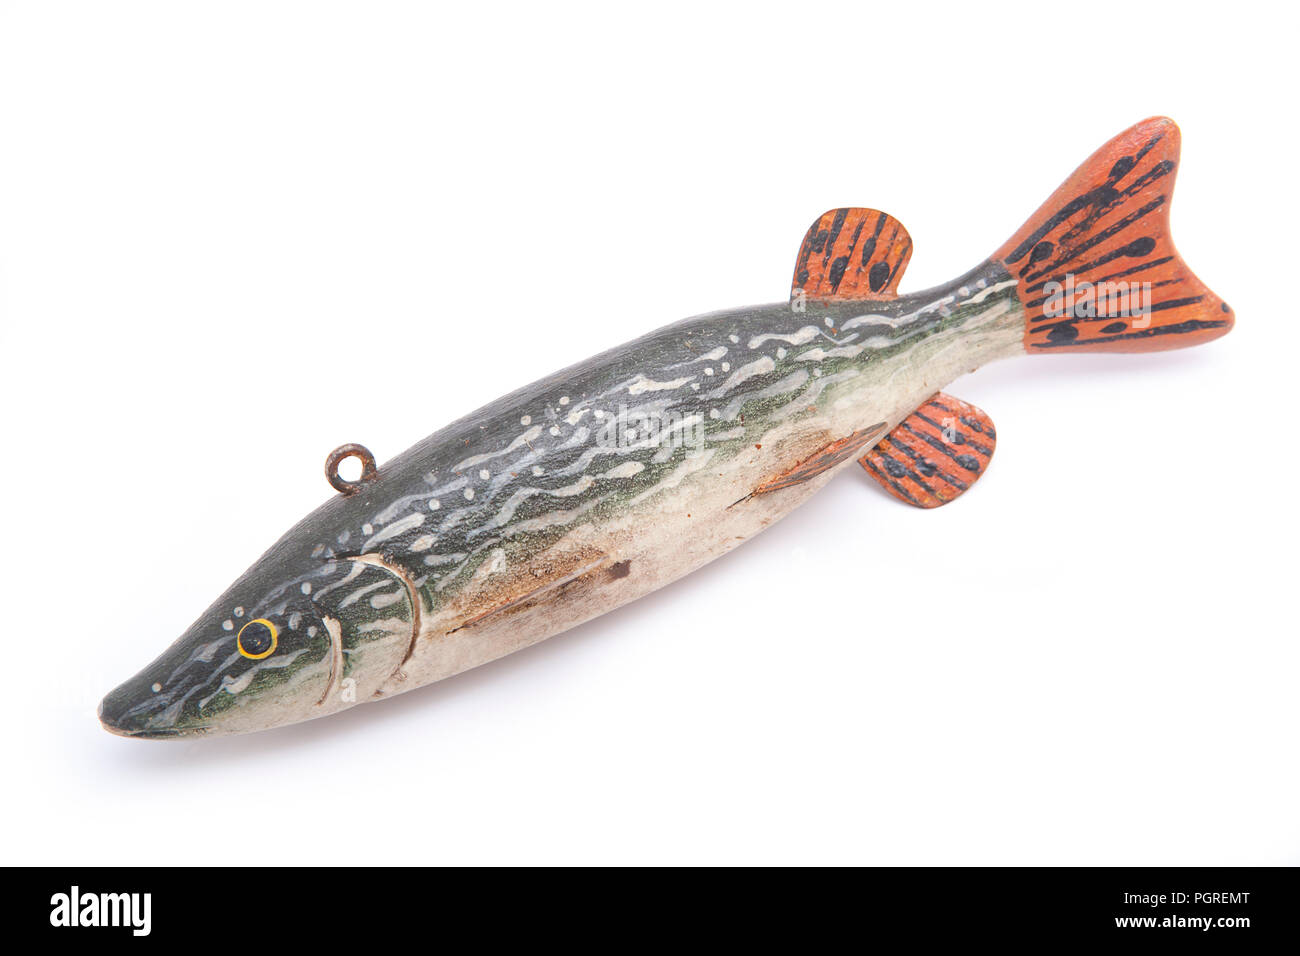 An old wooden decoy fish in the form of a pike. These lures were